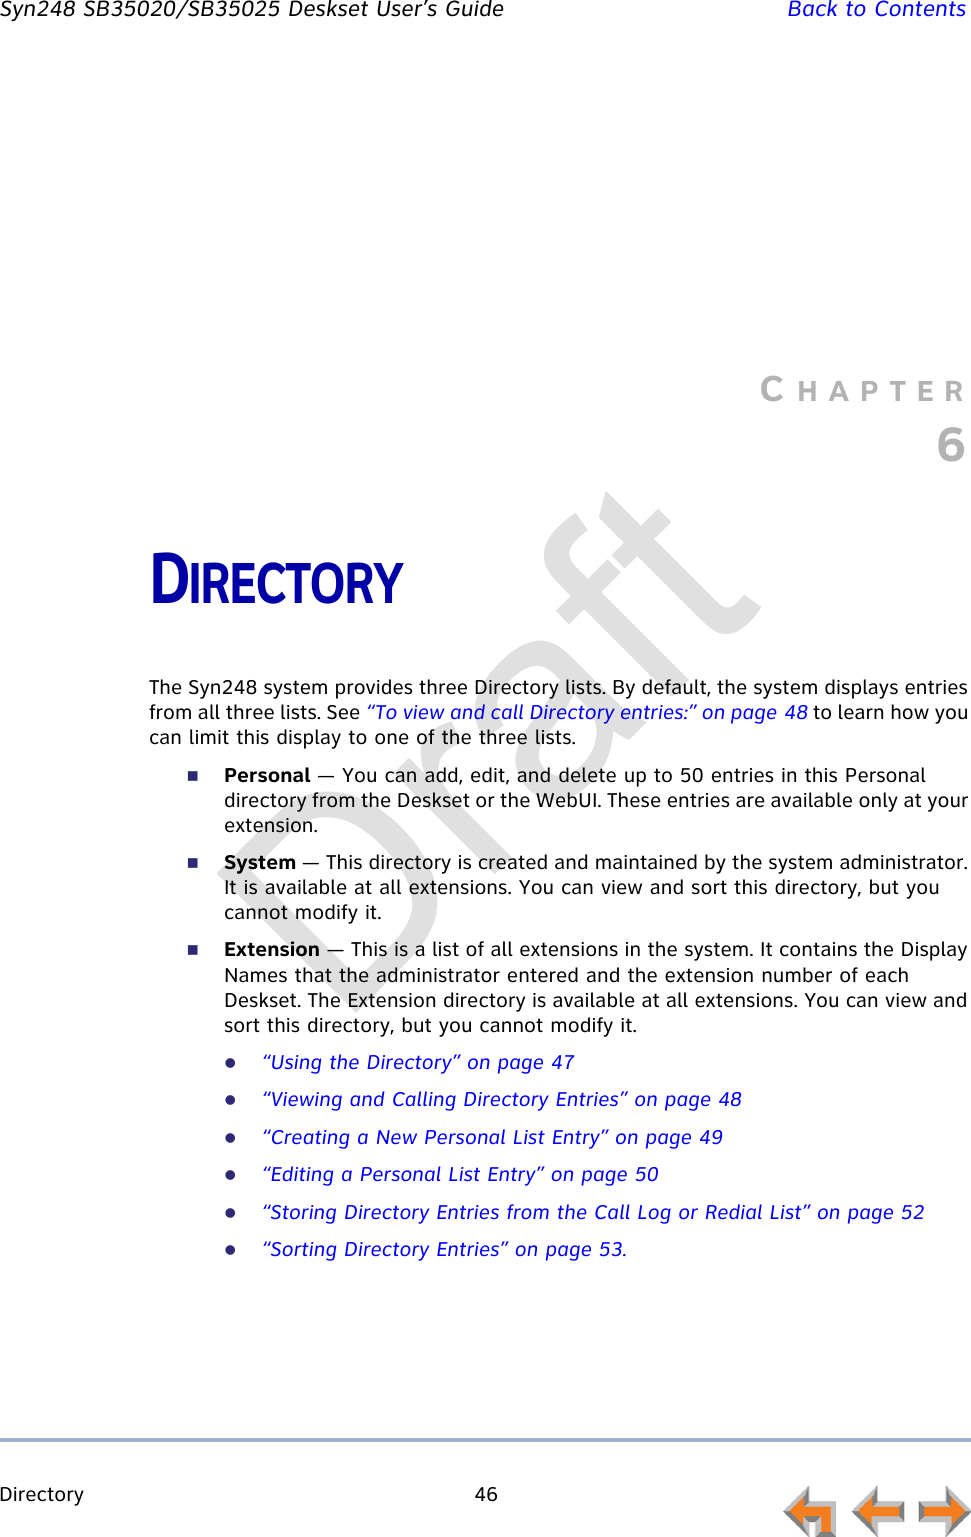 Directory 46         Syn248 SB35020/SB35025 Deskset User’s Guide Back to ContentsCHAPTER6DIRECTORYThe Syn248 system provides three Directory lists. By default, the system displays entries from all three lists. See “To view and call Directory entries:” on page 48 to learn how you can limit this display to one of the three lists.Personal — You can add, edit, and delete up to 50 entries in this Personal directory from the Deskset or the WebUI. These entries are available only at your extension.System — This directory is created and maintained by the system administrator. It is available at all extensions. You can view and sort this directory, but you cannot modify it.Extension — This is a list of all extensions in the system. It contains the Display Names that the administrator entered and the extension number of each Deskset. The Extension directory is available at all extensions. You can view and sort this directory, but you cannot modify it.“Using the Directory” on page 47“Viewing and Calling Directory Entries” on page 48“Creating a New Personal List Entry” on page 49“Editing a Personal List Entry” on page 50“Storing Directory Entries from the Call Log or Redial List” on page 52“Sorting Directory Entries” on page 53.Draft